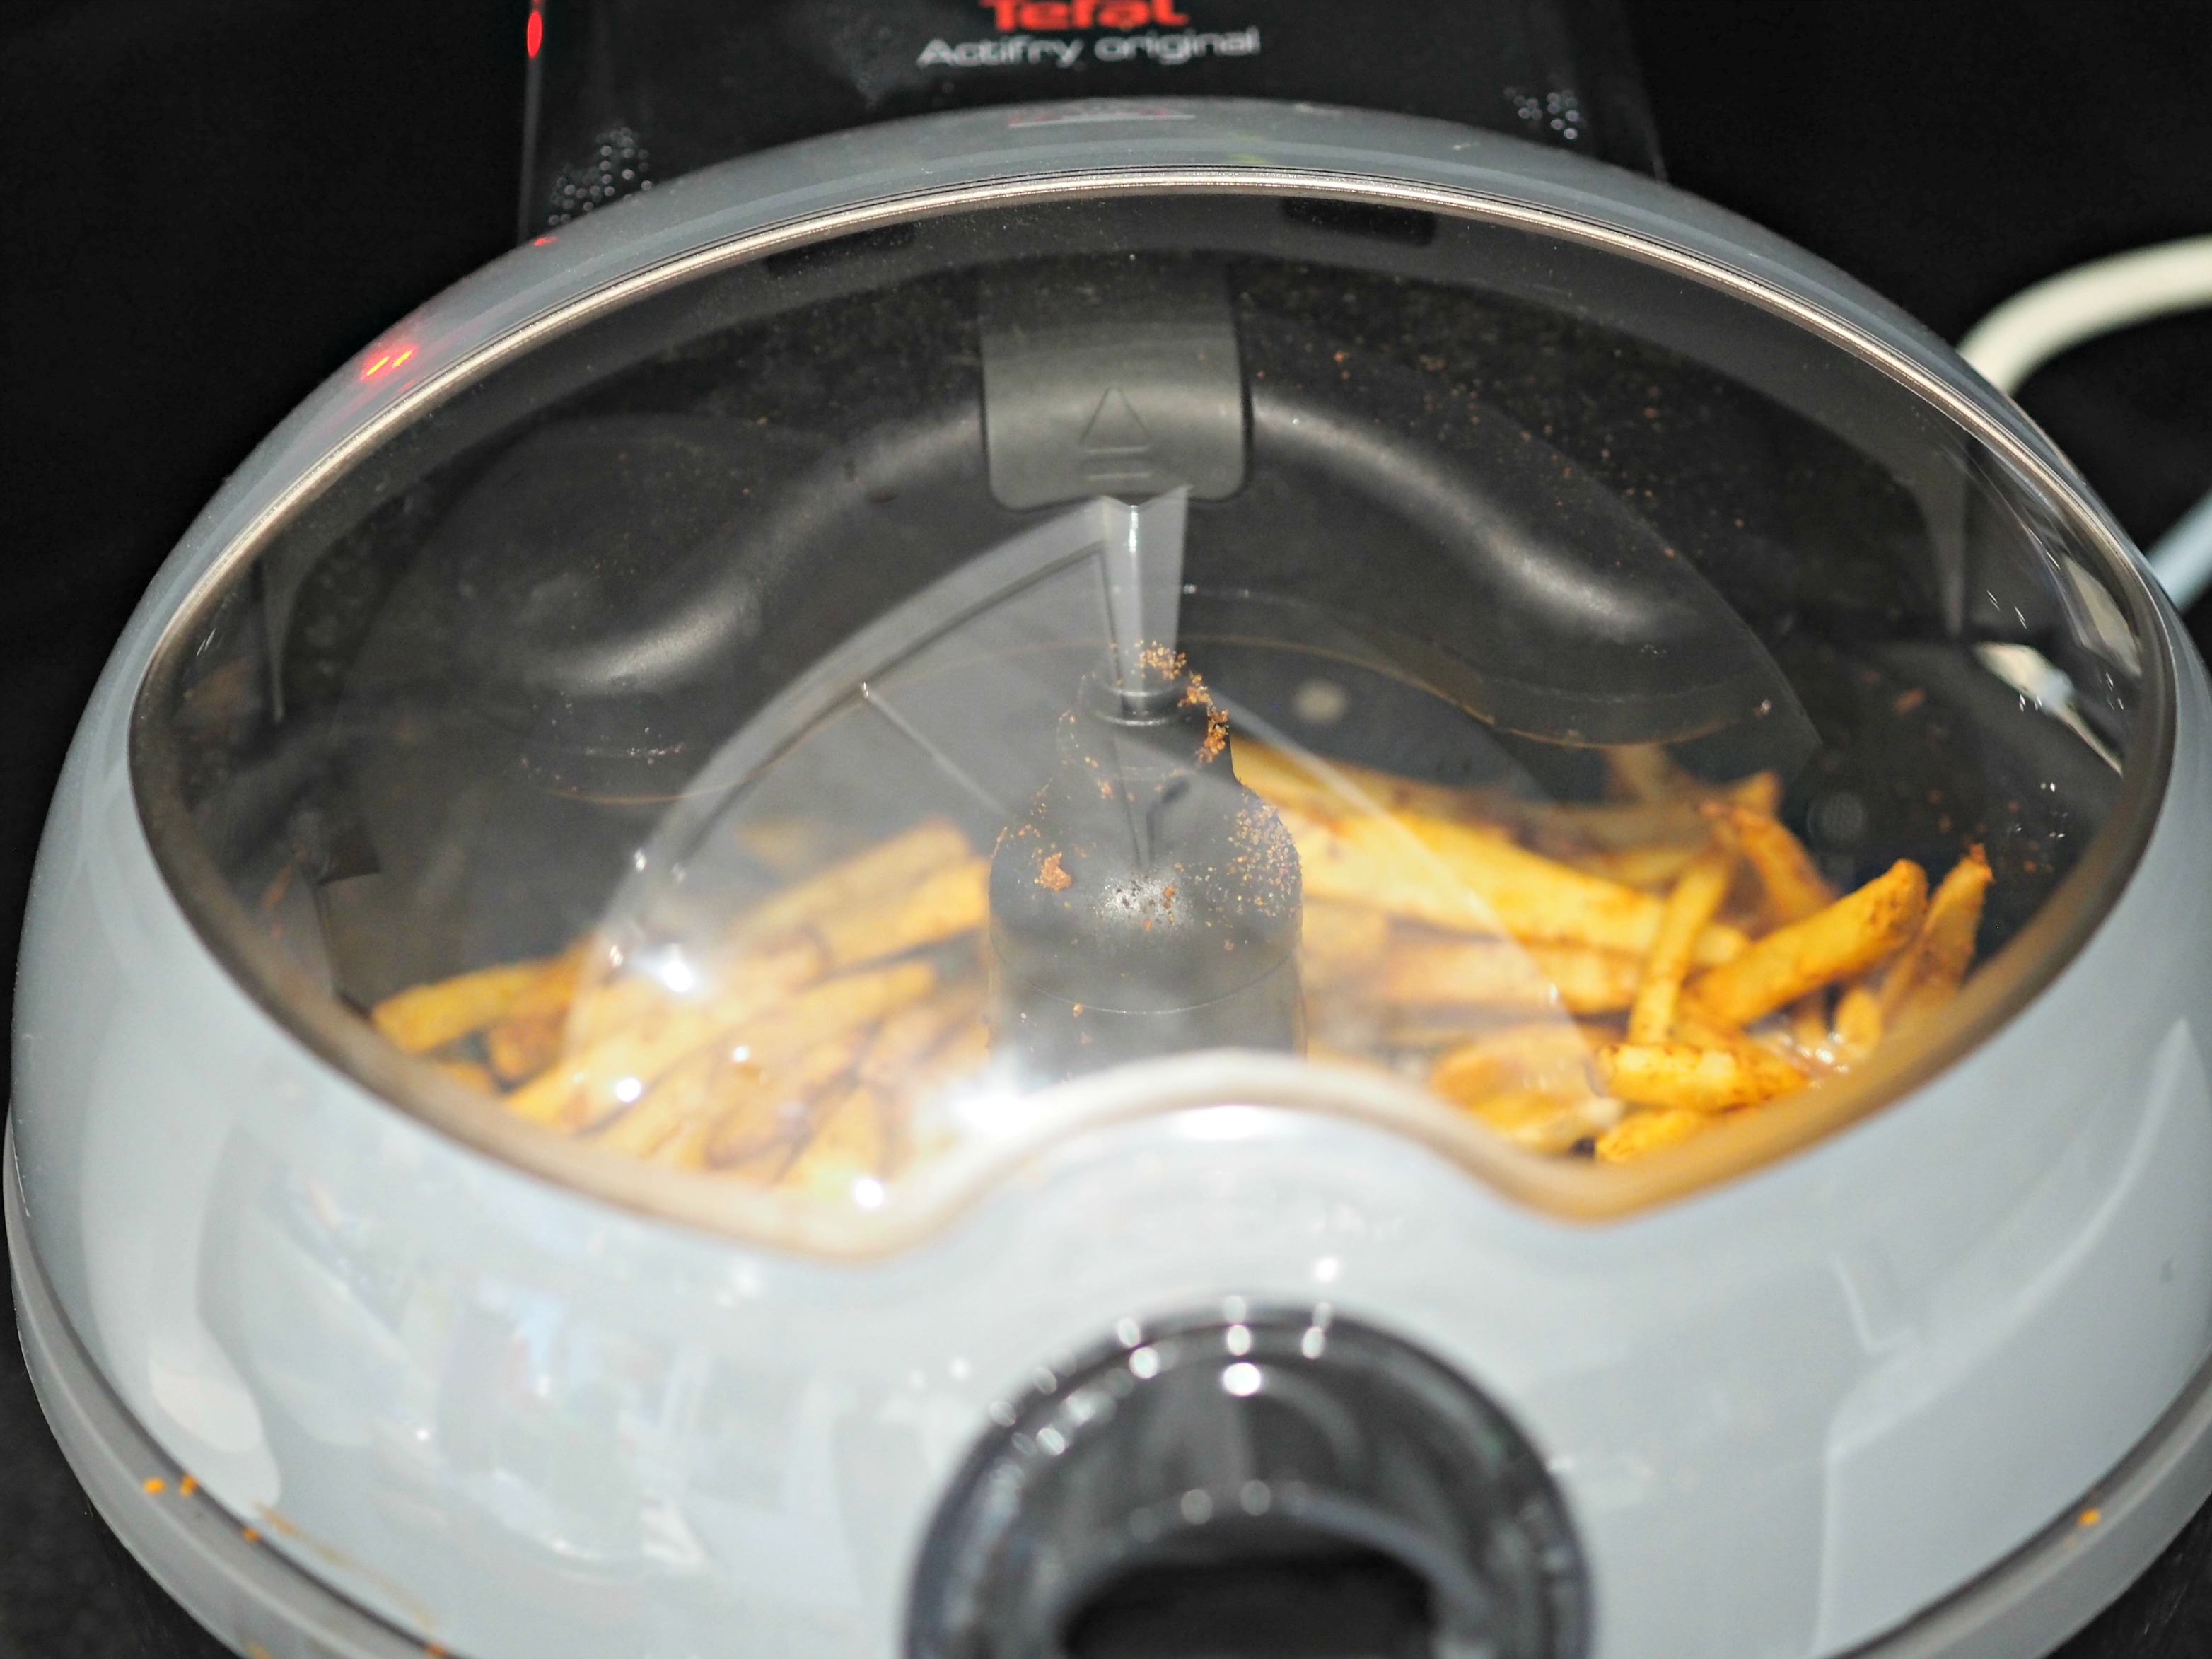 https://www.laurasummers.co.uk/wp-content/uploads/2018/07/BENS-ZONE-Tefal-ActiFry-FZ740840-Review-chips-cooking.jpg